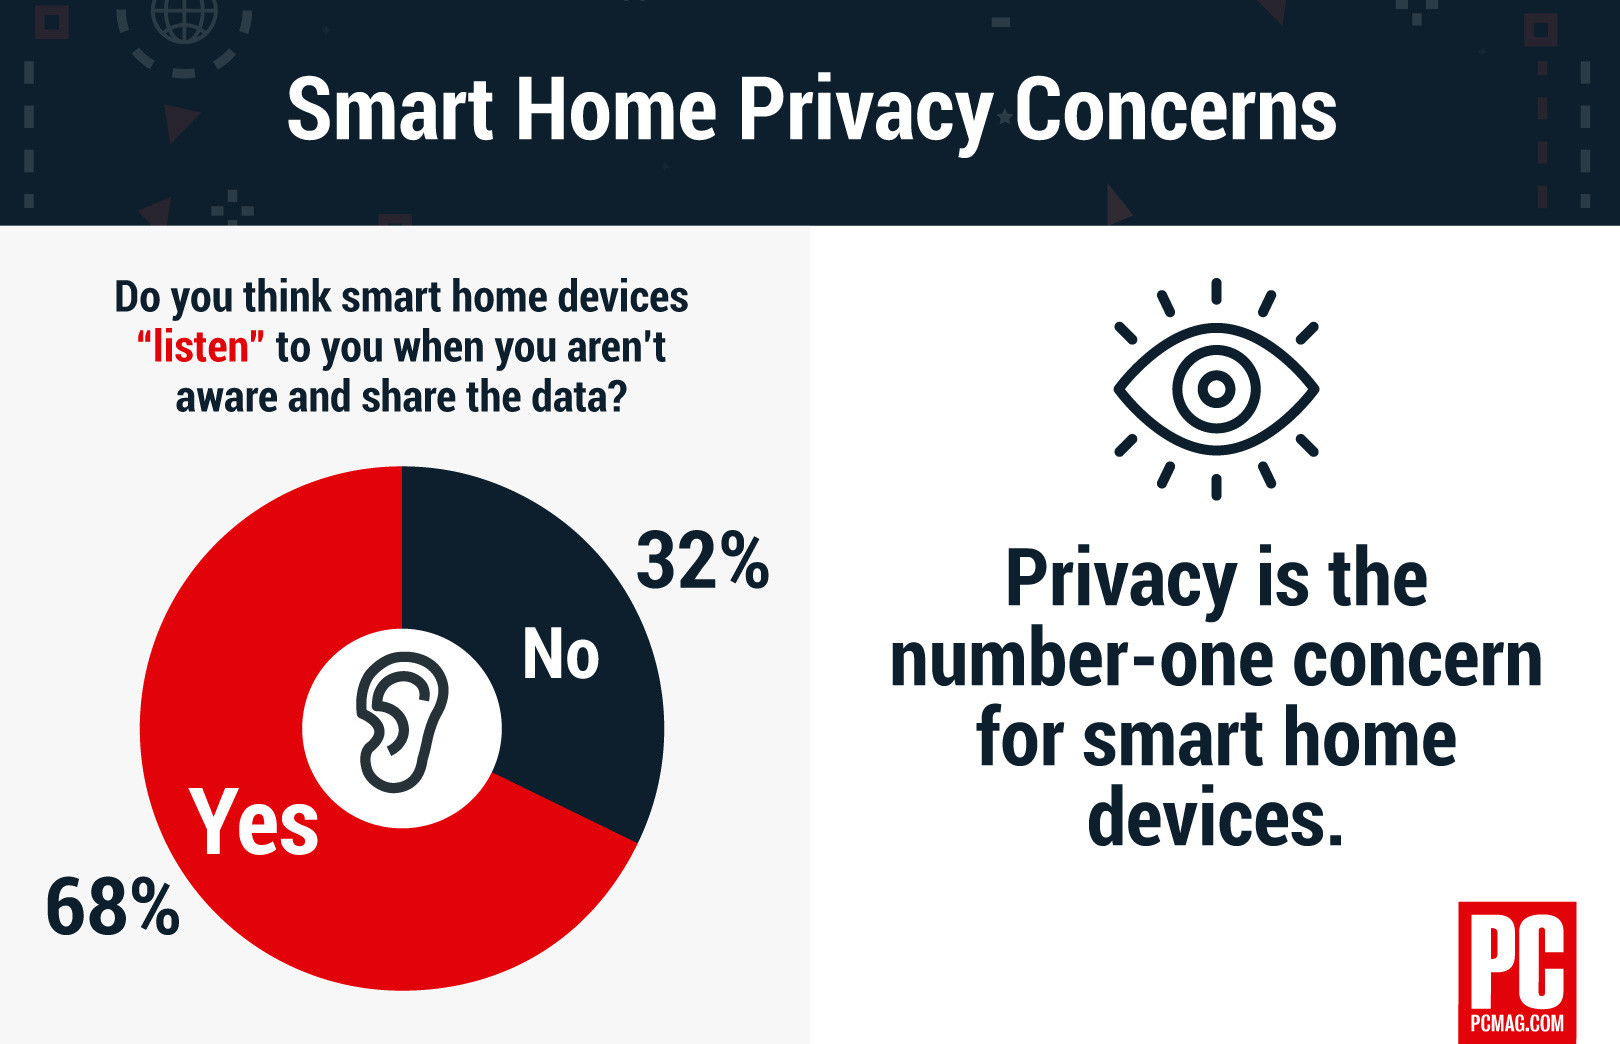 68% of people think their smart home devices listen and share the data